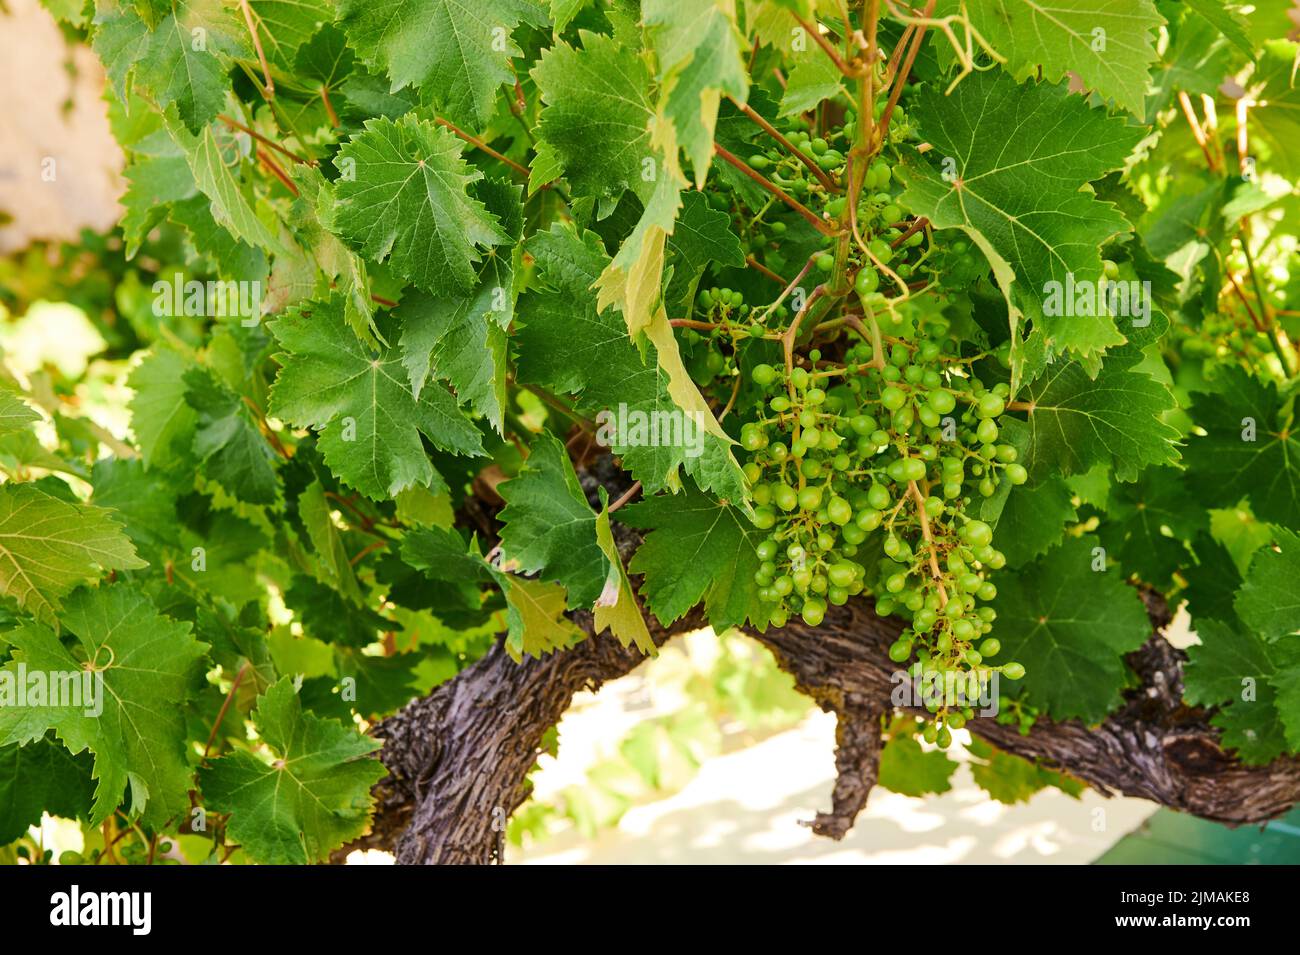 Green grape leaves and bunch of green grapes Stock Photo